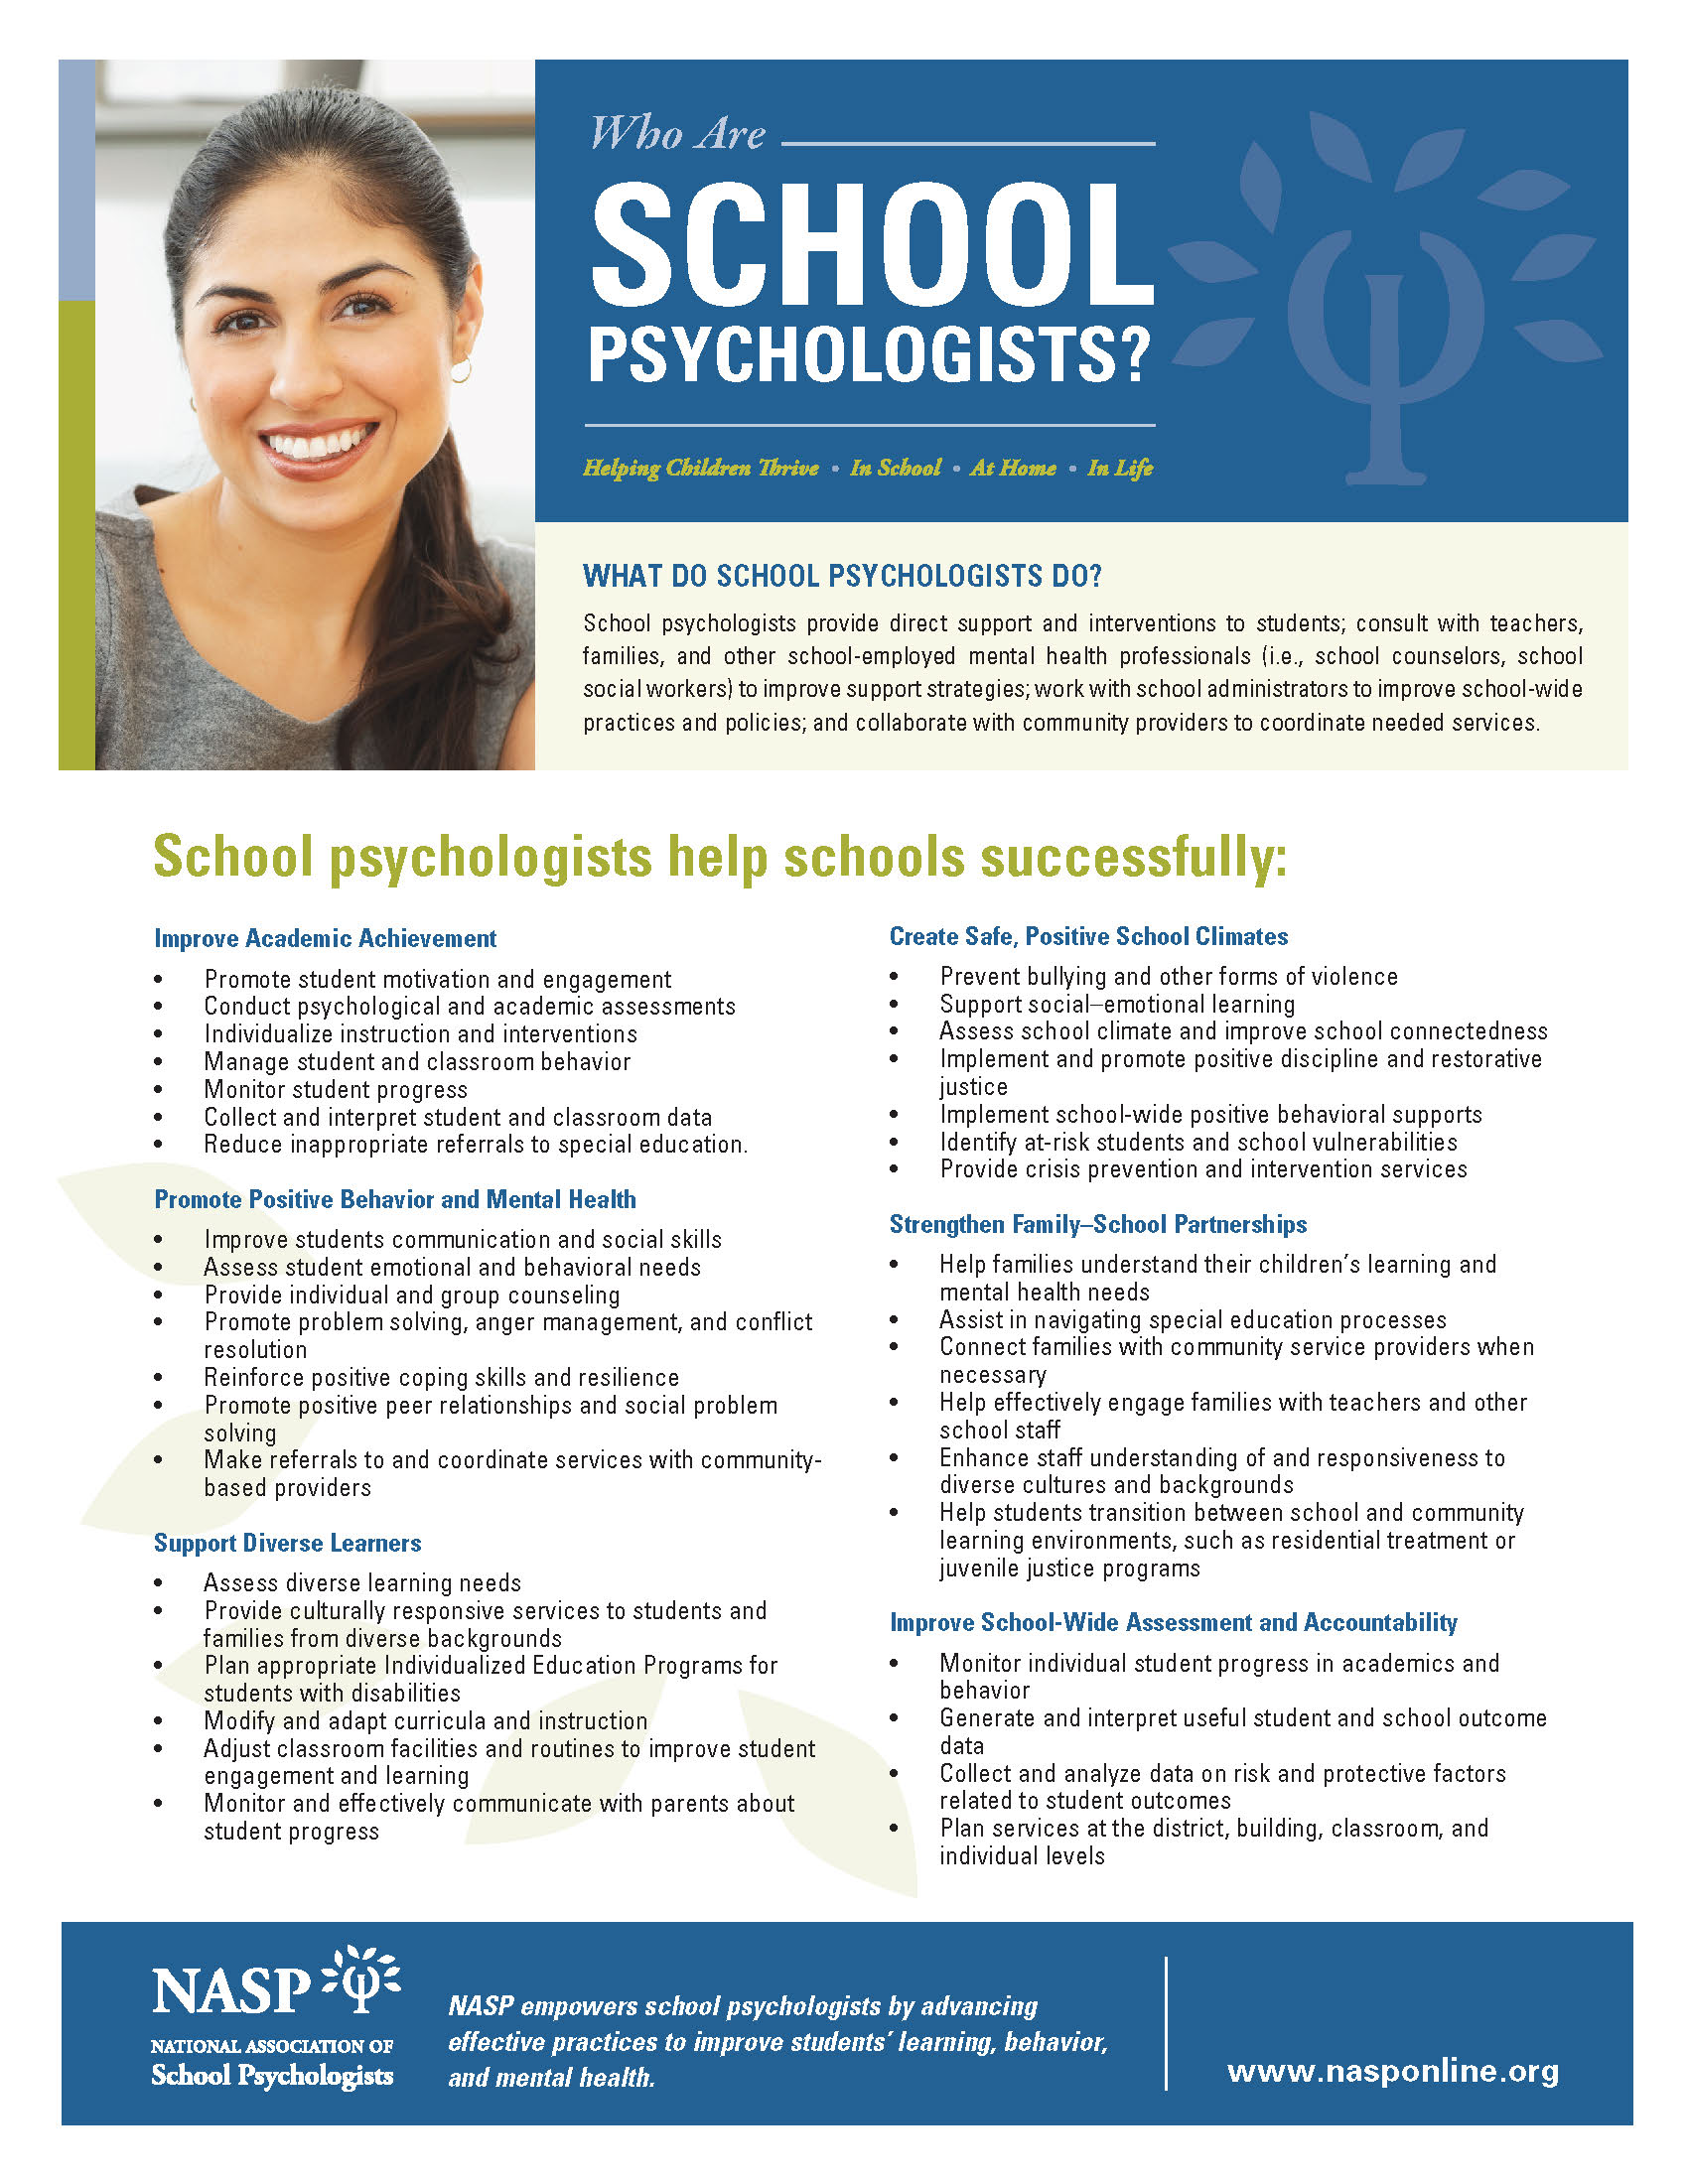 image of nasp flyer